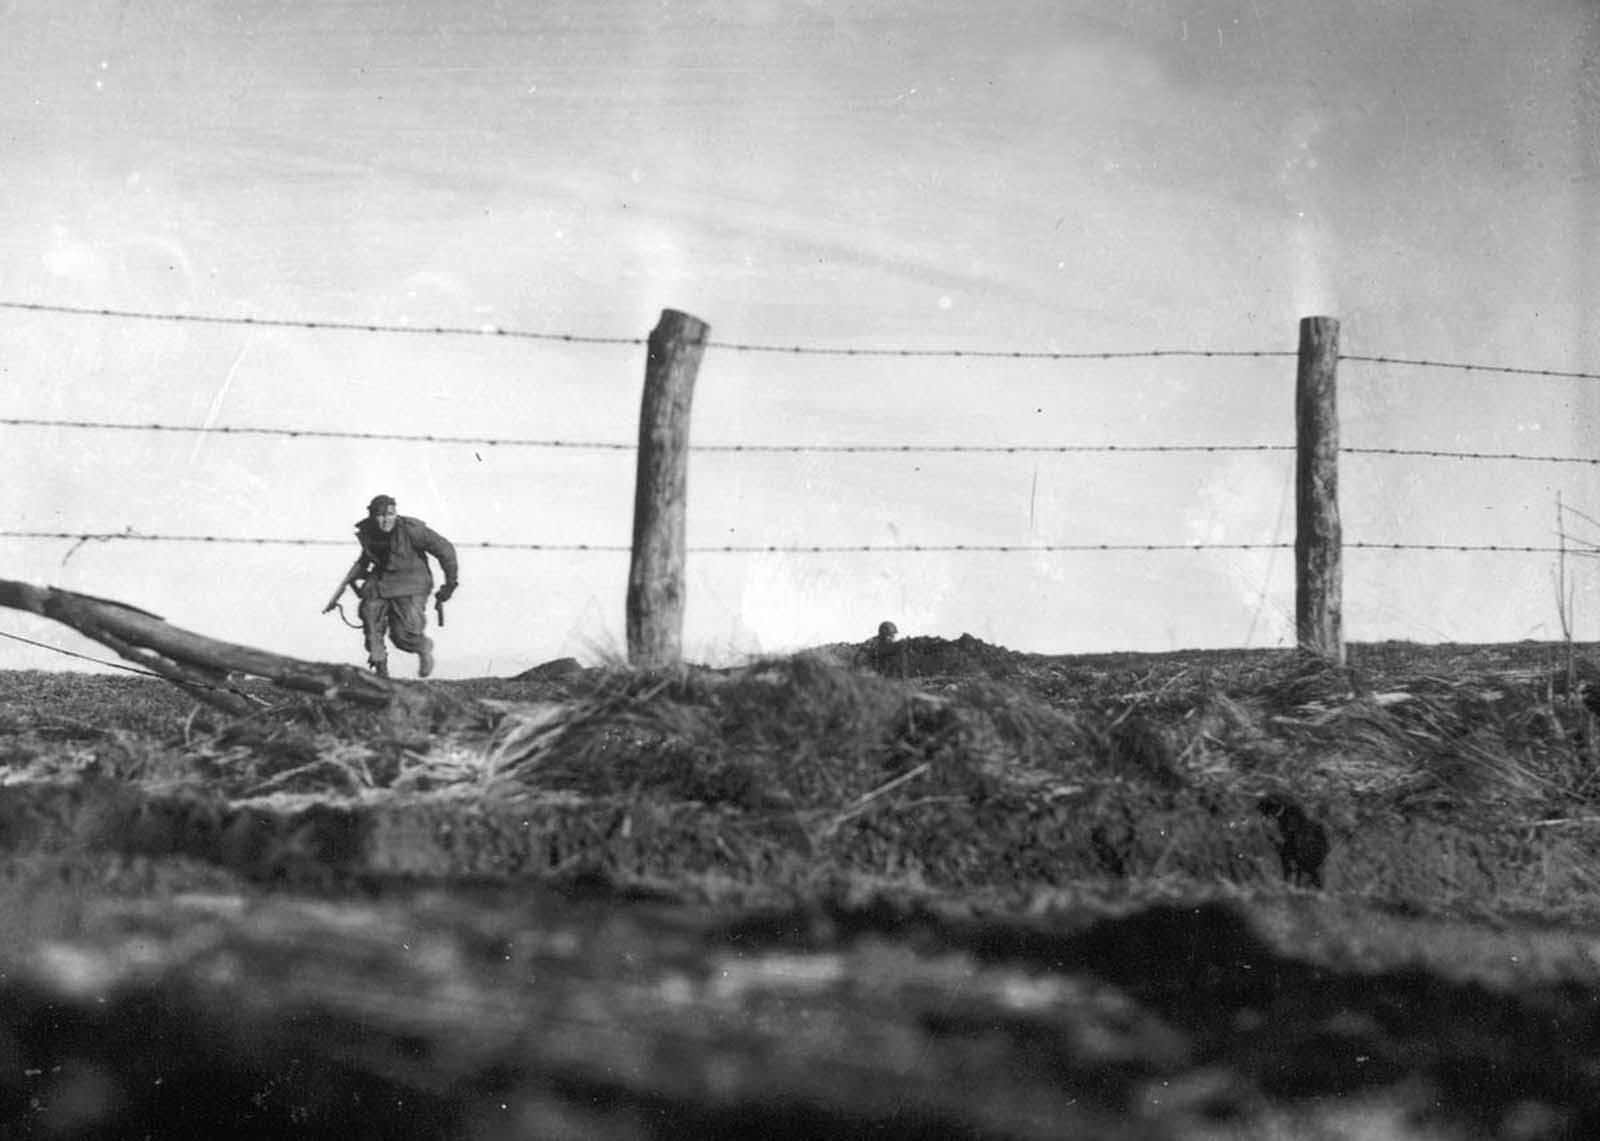 An infantryman from the U.S. Army’s 82nd Airborne Division goes out on a one-man sortie while covered by a comrade in the background, near Bra, Belgium, on December 24, 1944.